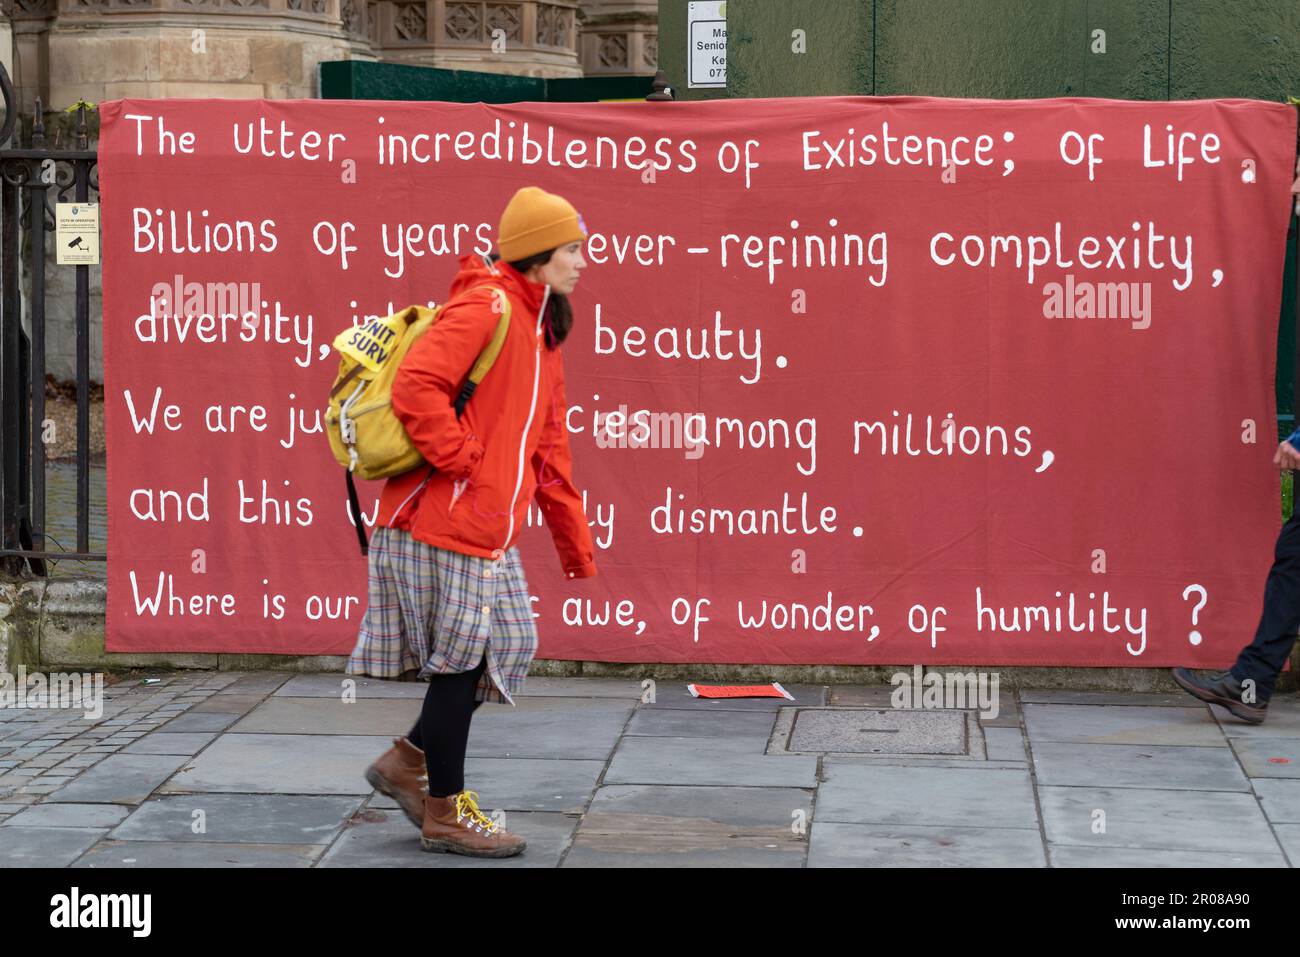 Quote at Extinction Rebellion encampment in Parliament Square, London, UK. The utter incredibleness of Existence; of Life...diversity...complexity Stock Photo